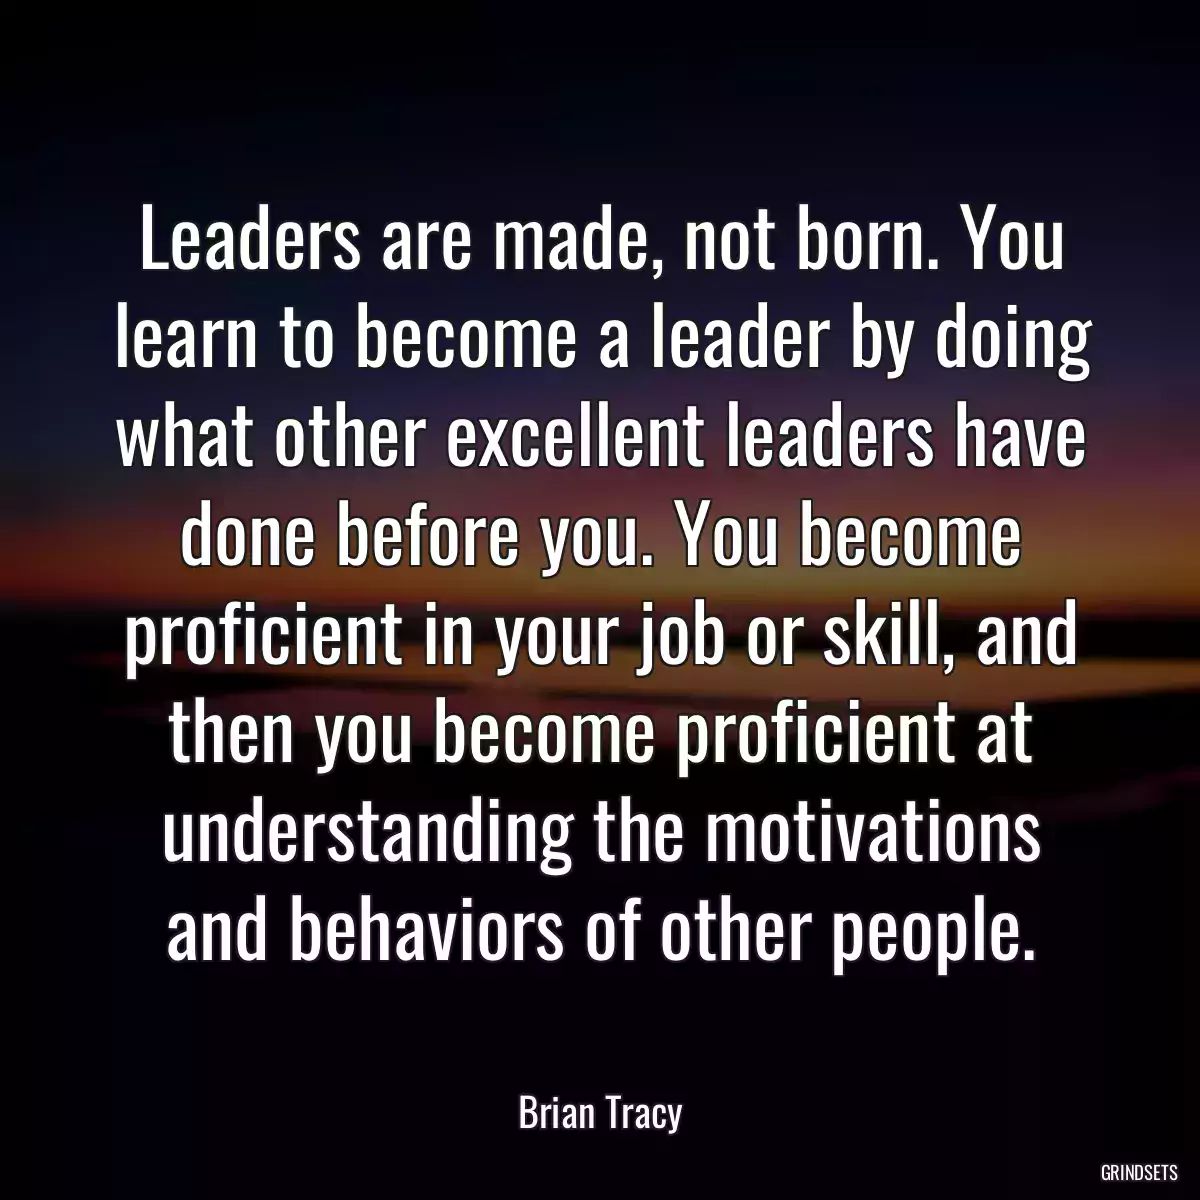 Leaders are made, not born. You learn to become a leader by doing what other excellent leaders have done before you. You become proficient in your job or skill, and then you become proficient at understanding the motivations and behaviors of other people.